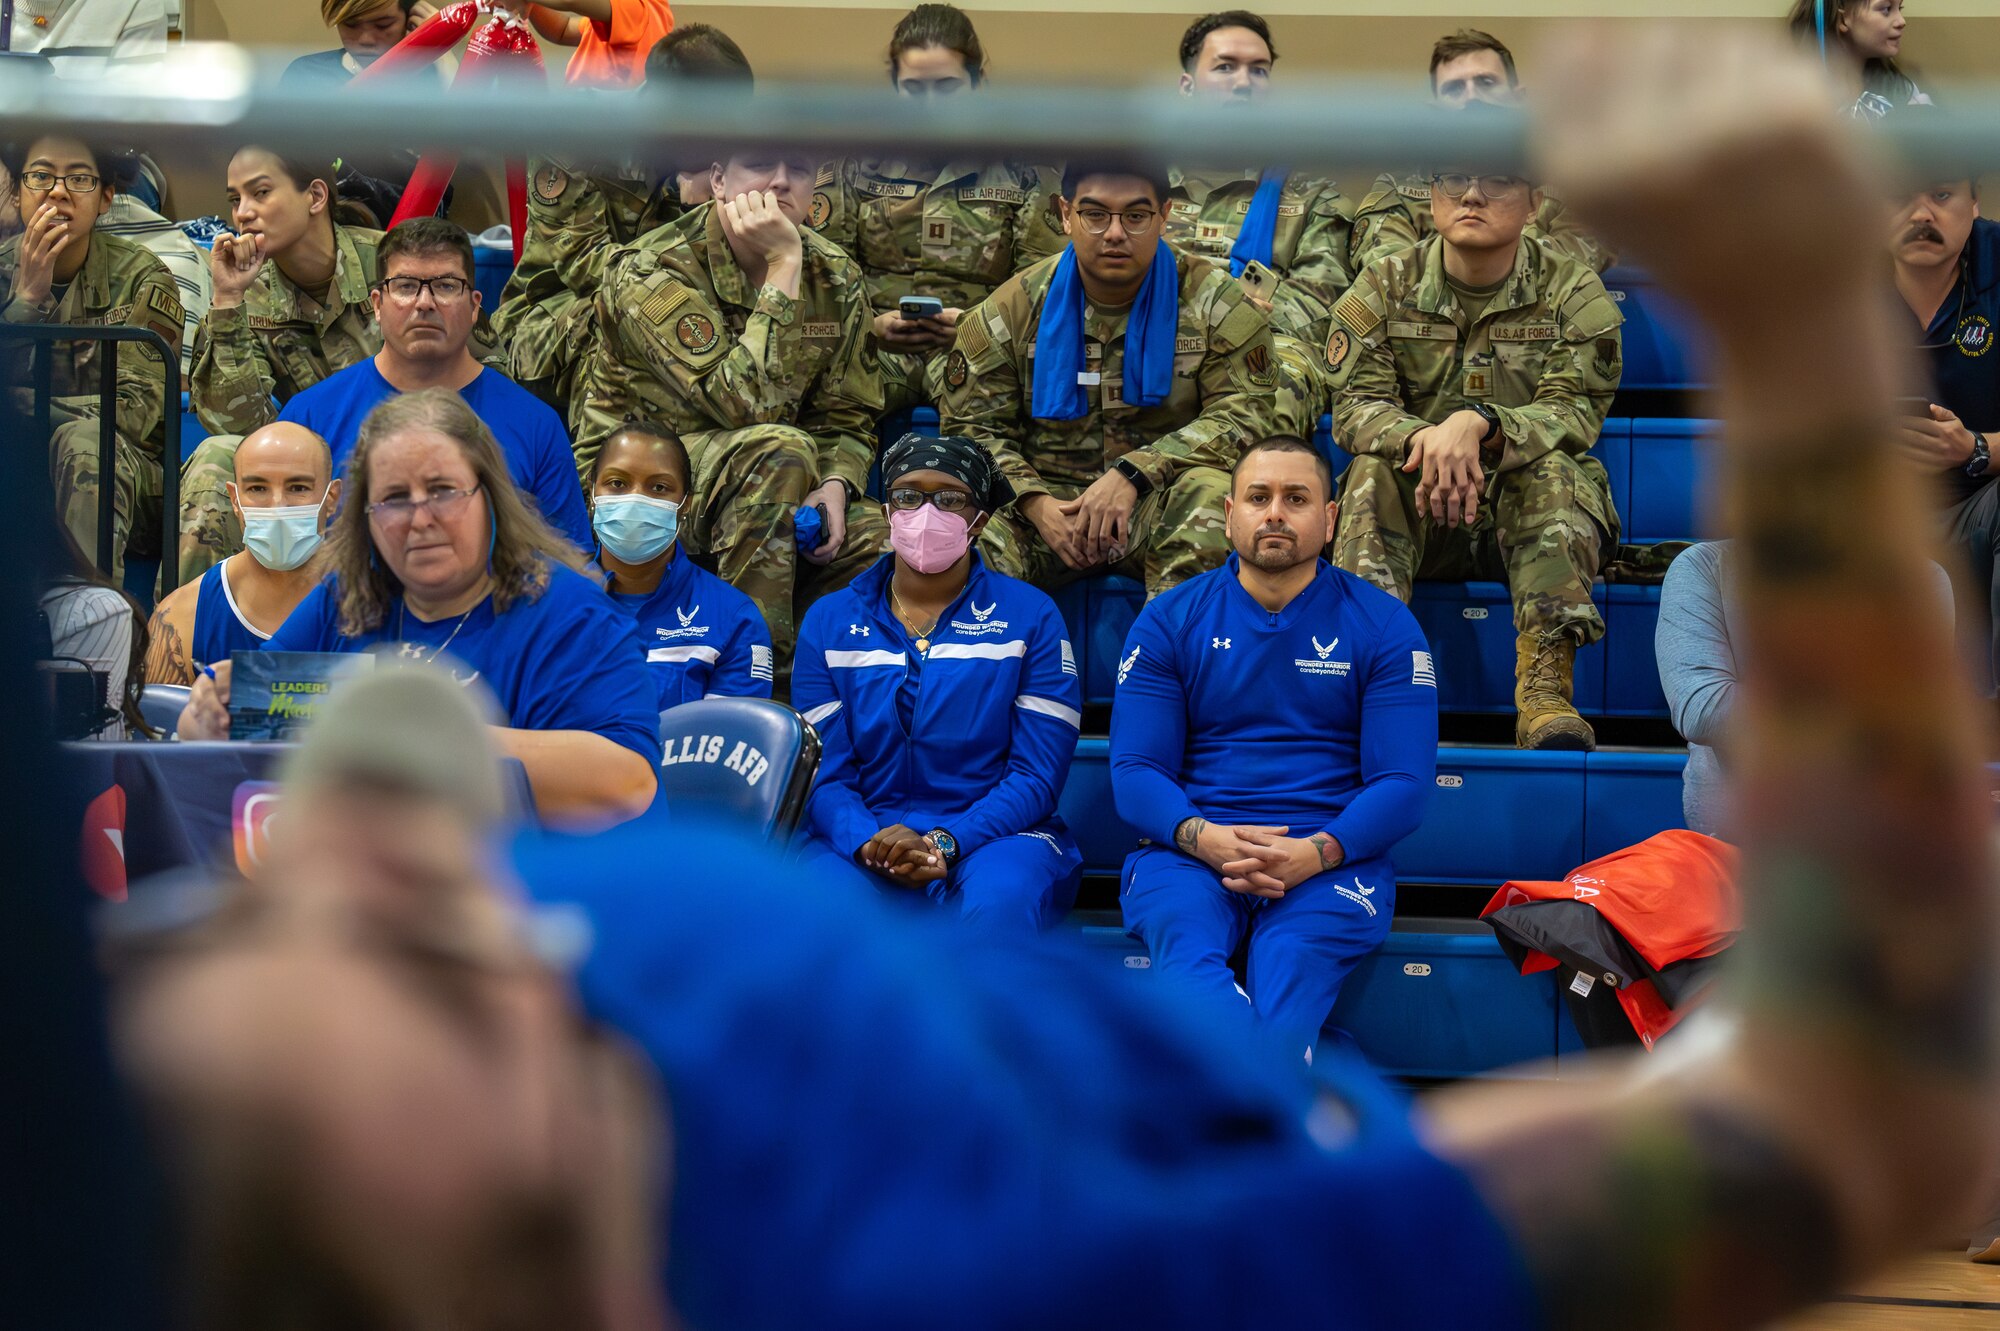 Attendees watch as a member of the U.S. Air Force team competes in the 2024 Air Force and Marine Corps powerlifting competition at Nellis Air Force Base, Nevada, March 8, 2024.